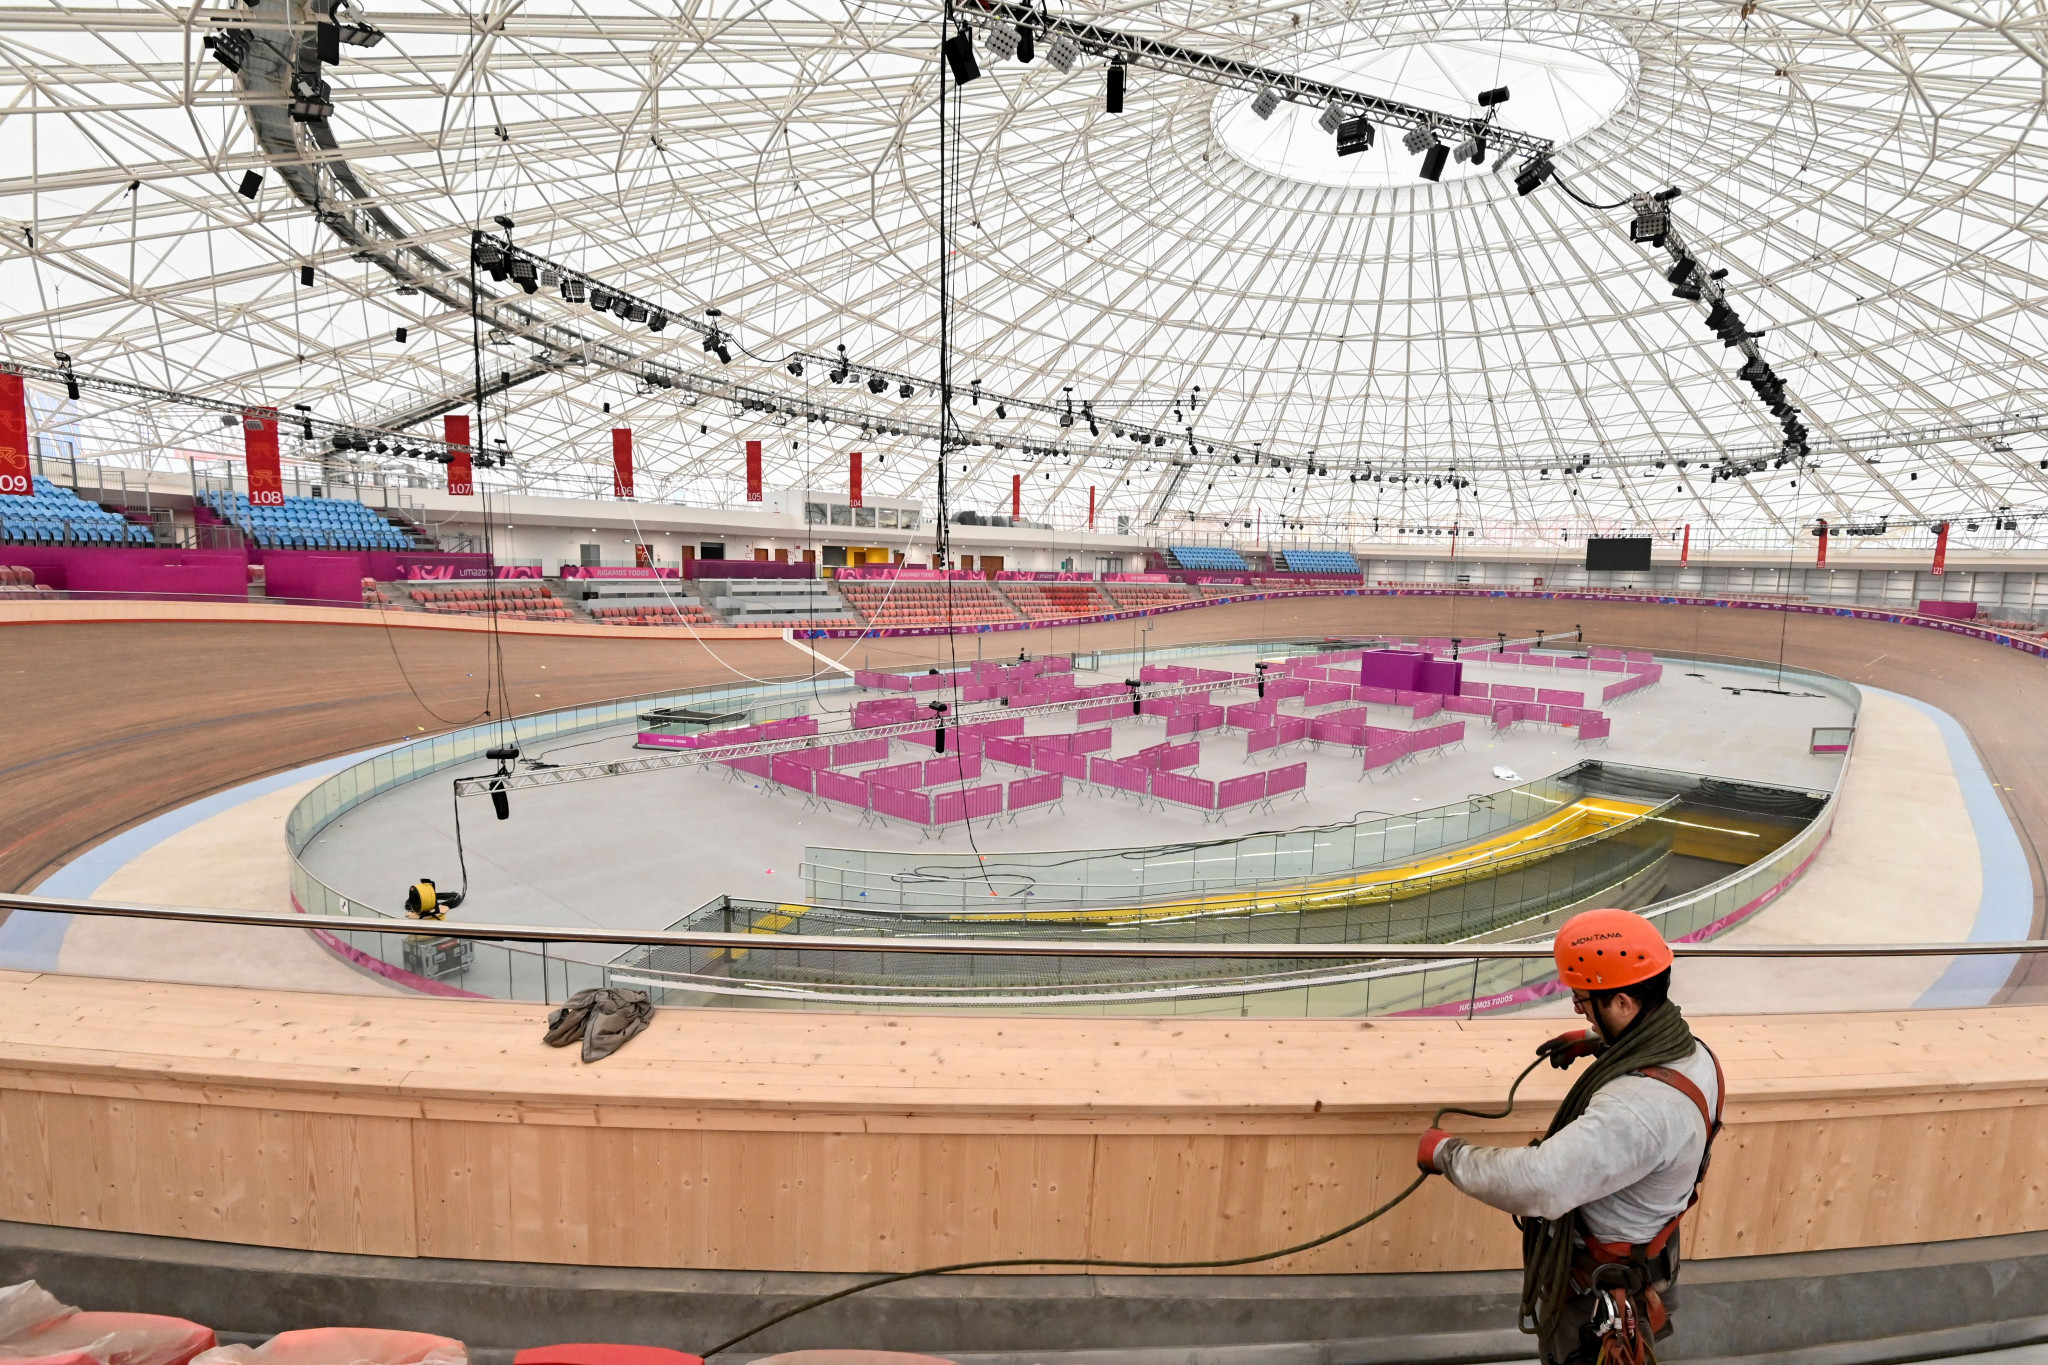 Elite competition will return to the velodrome used at the Lima 2019 Pan American Games when it hosts the Pan American Track Cycling Championships ©Getty Images